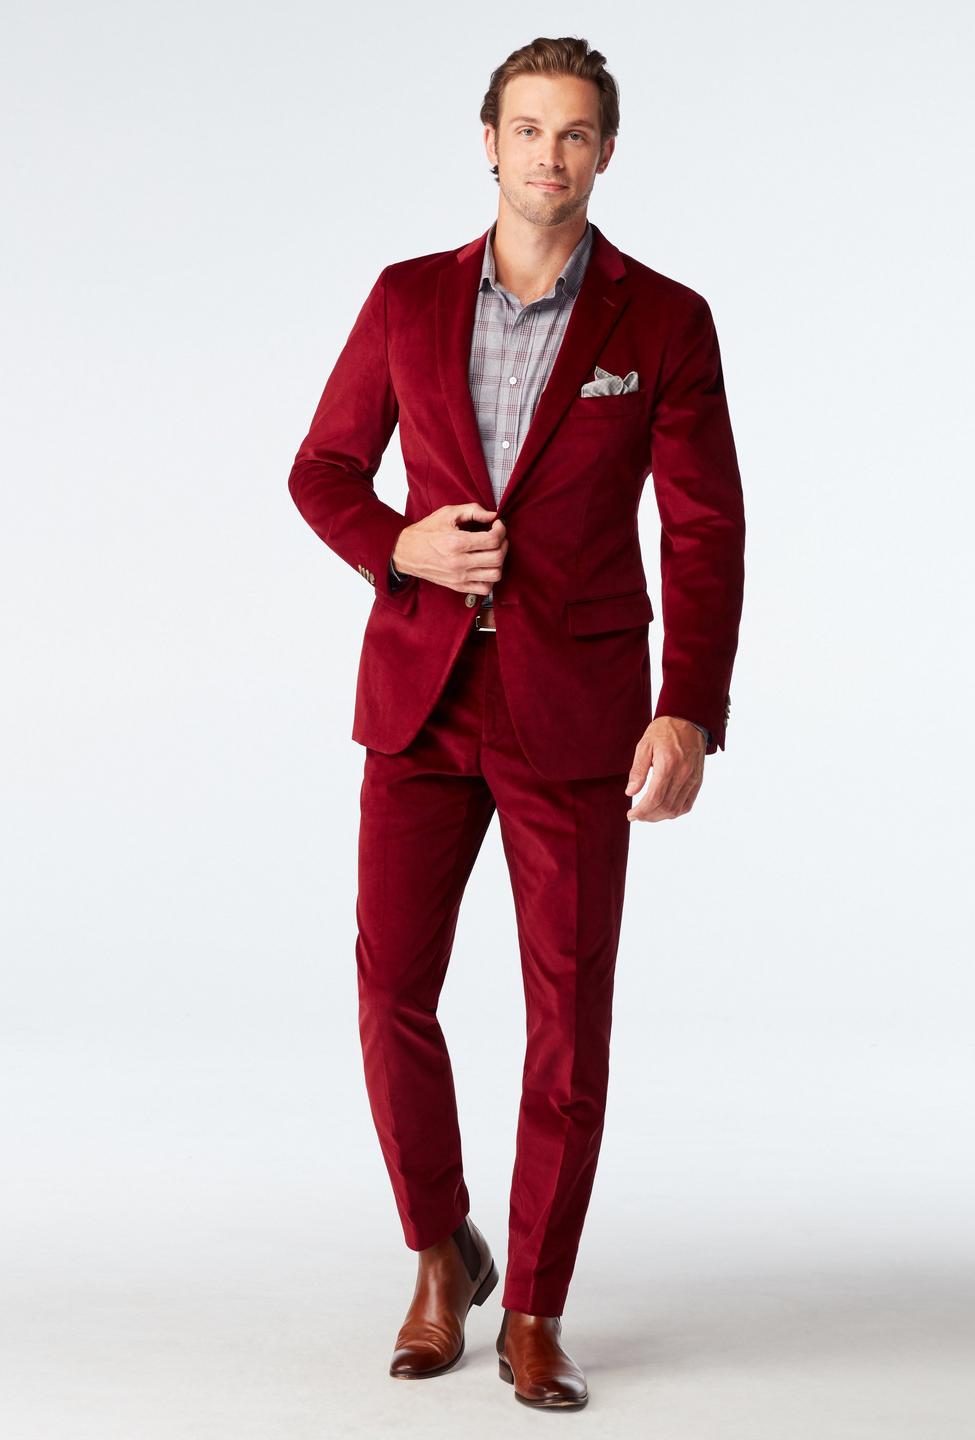 Red suit - Flaxton Solid Design from Seasonal Indochino Collection